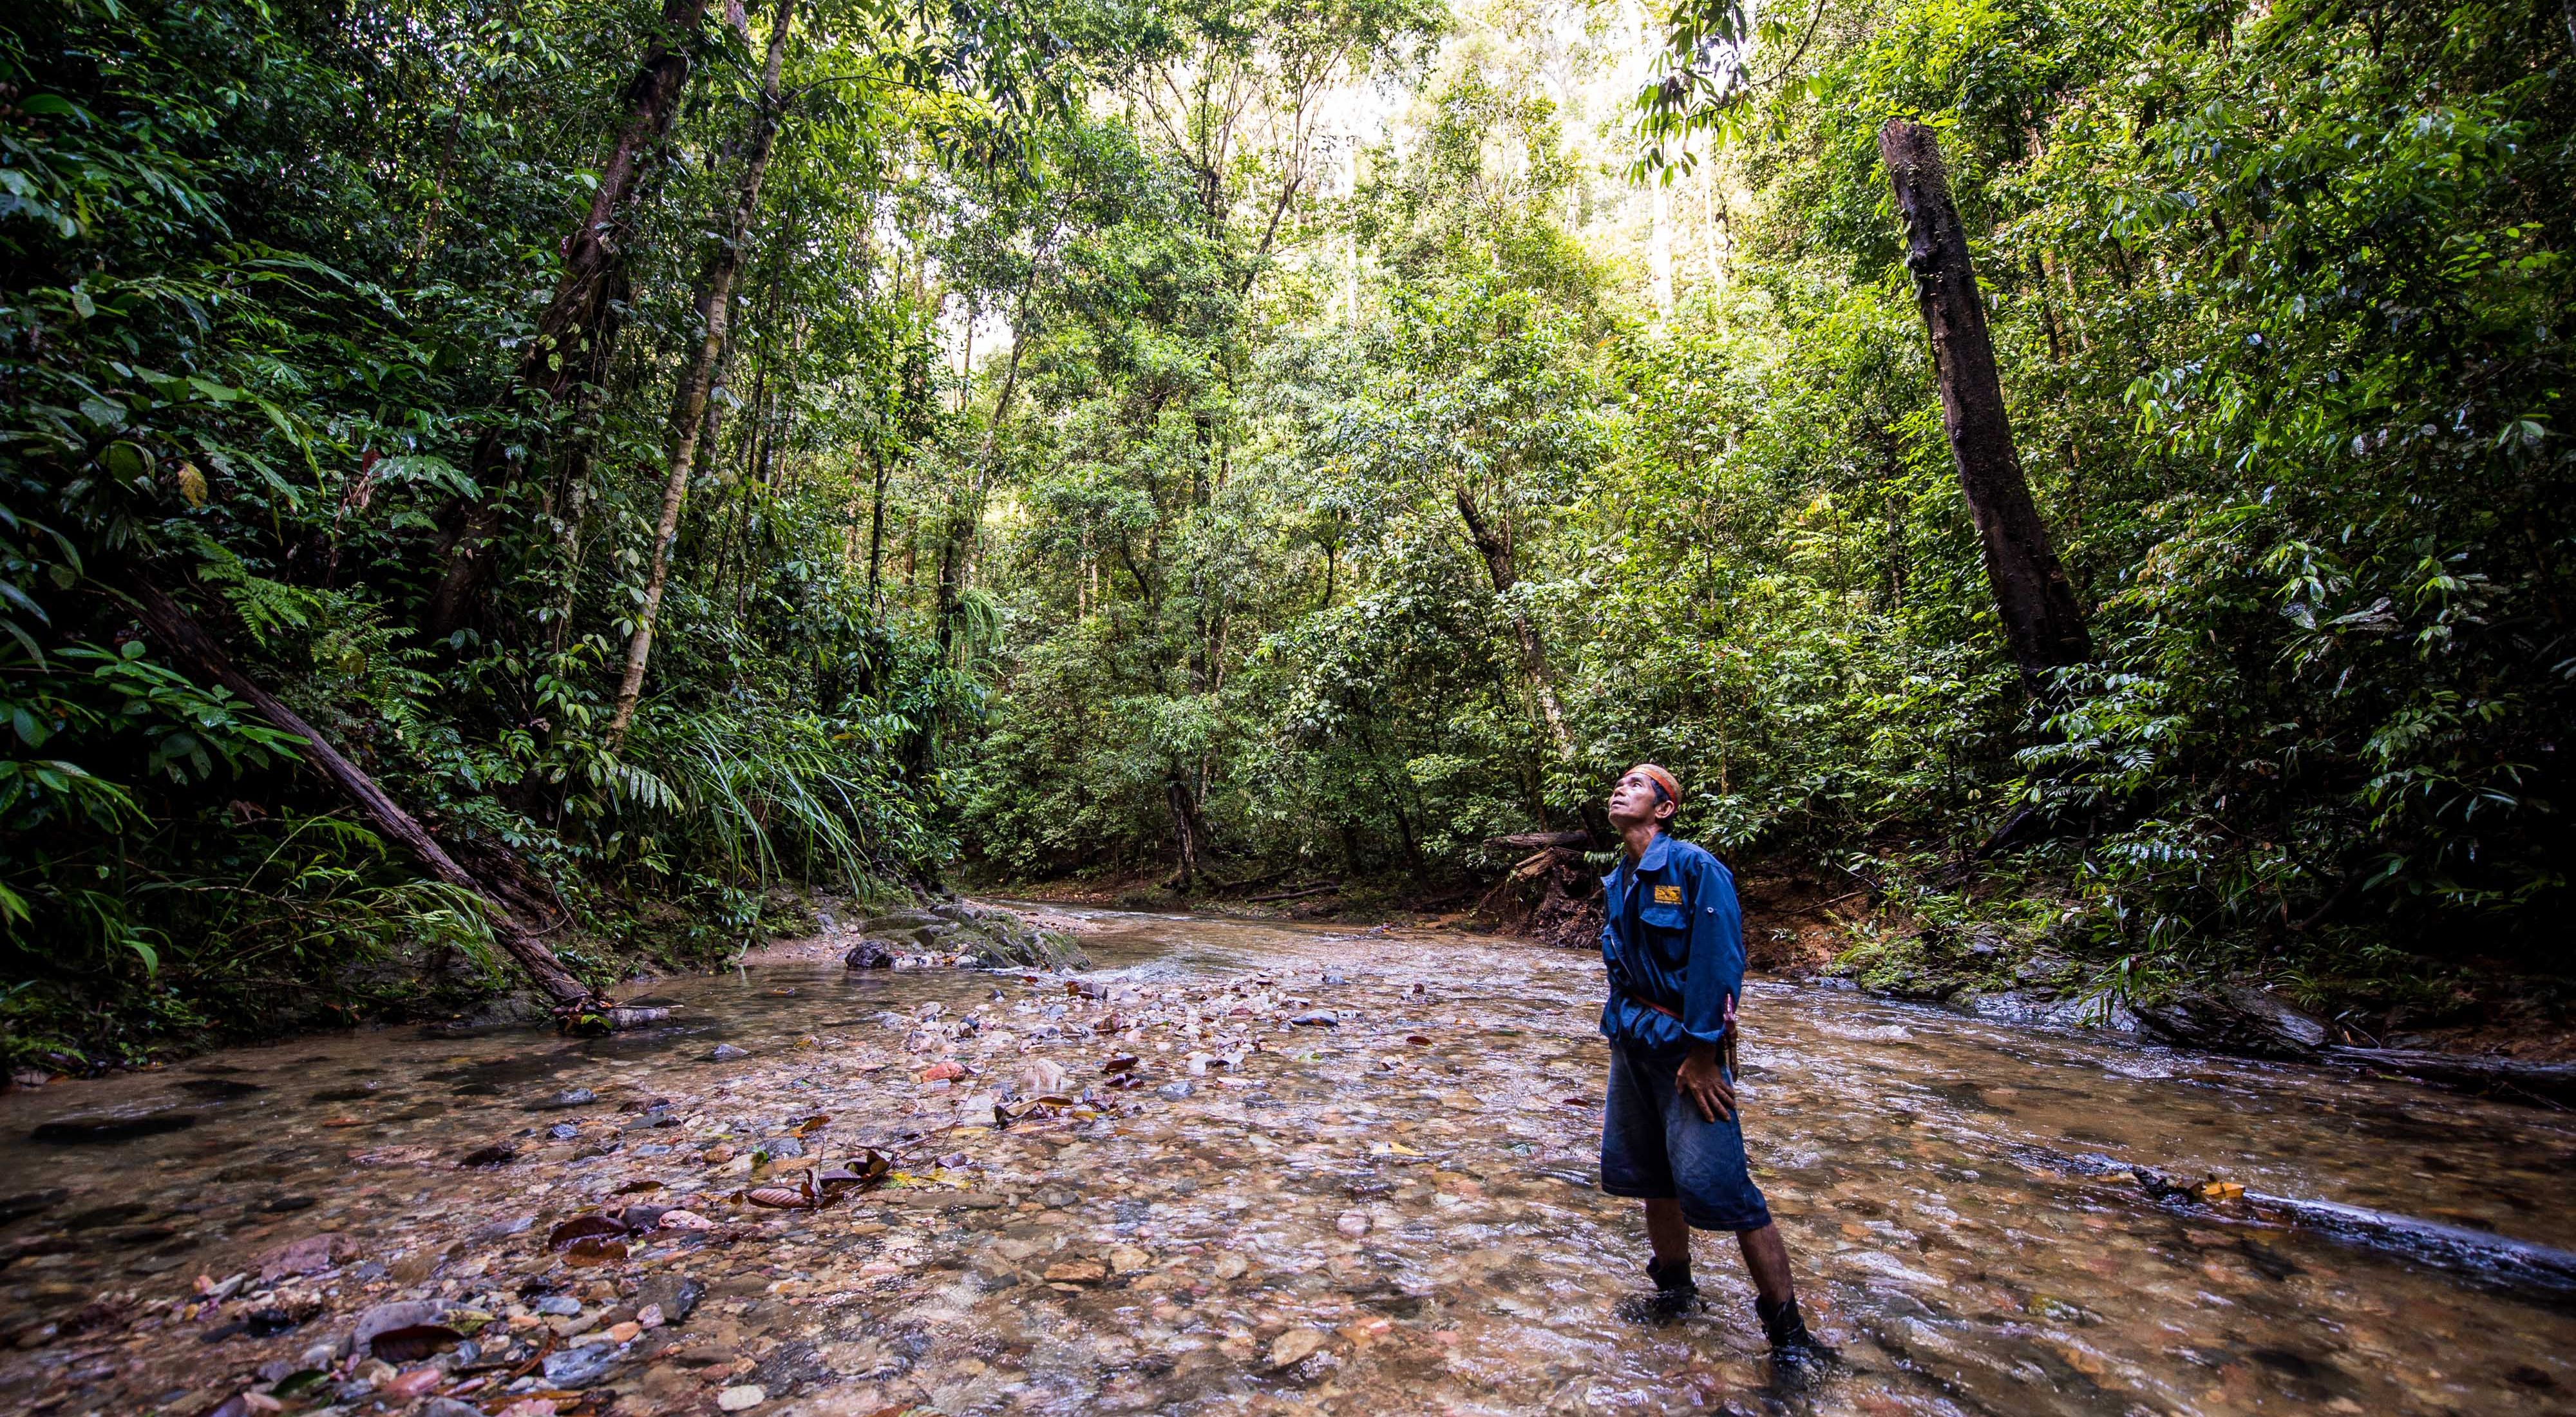 A community member patrols Wehea Protected Forest, which provides important habitat for orangutans.